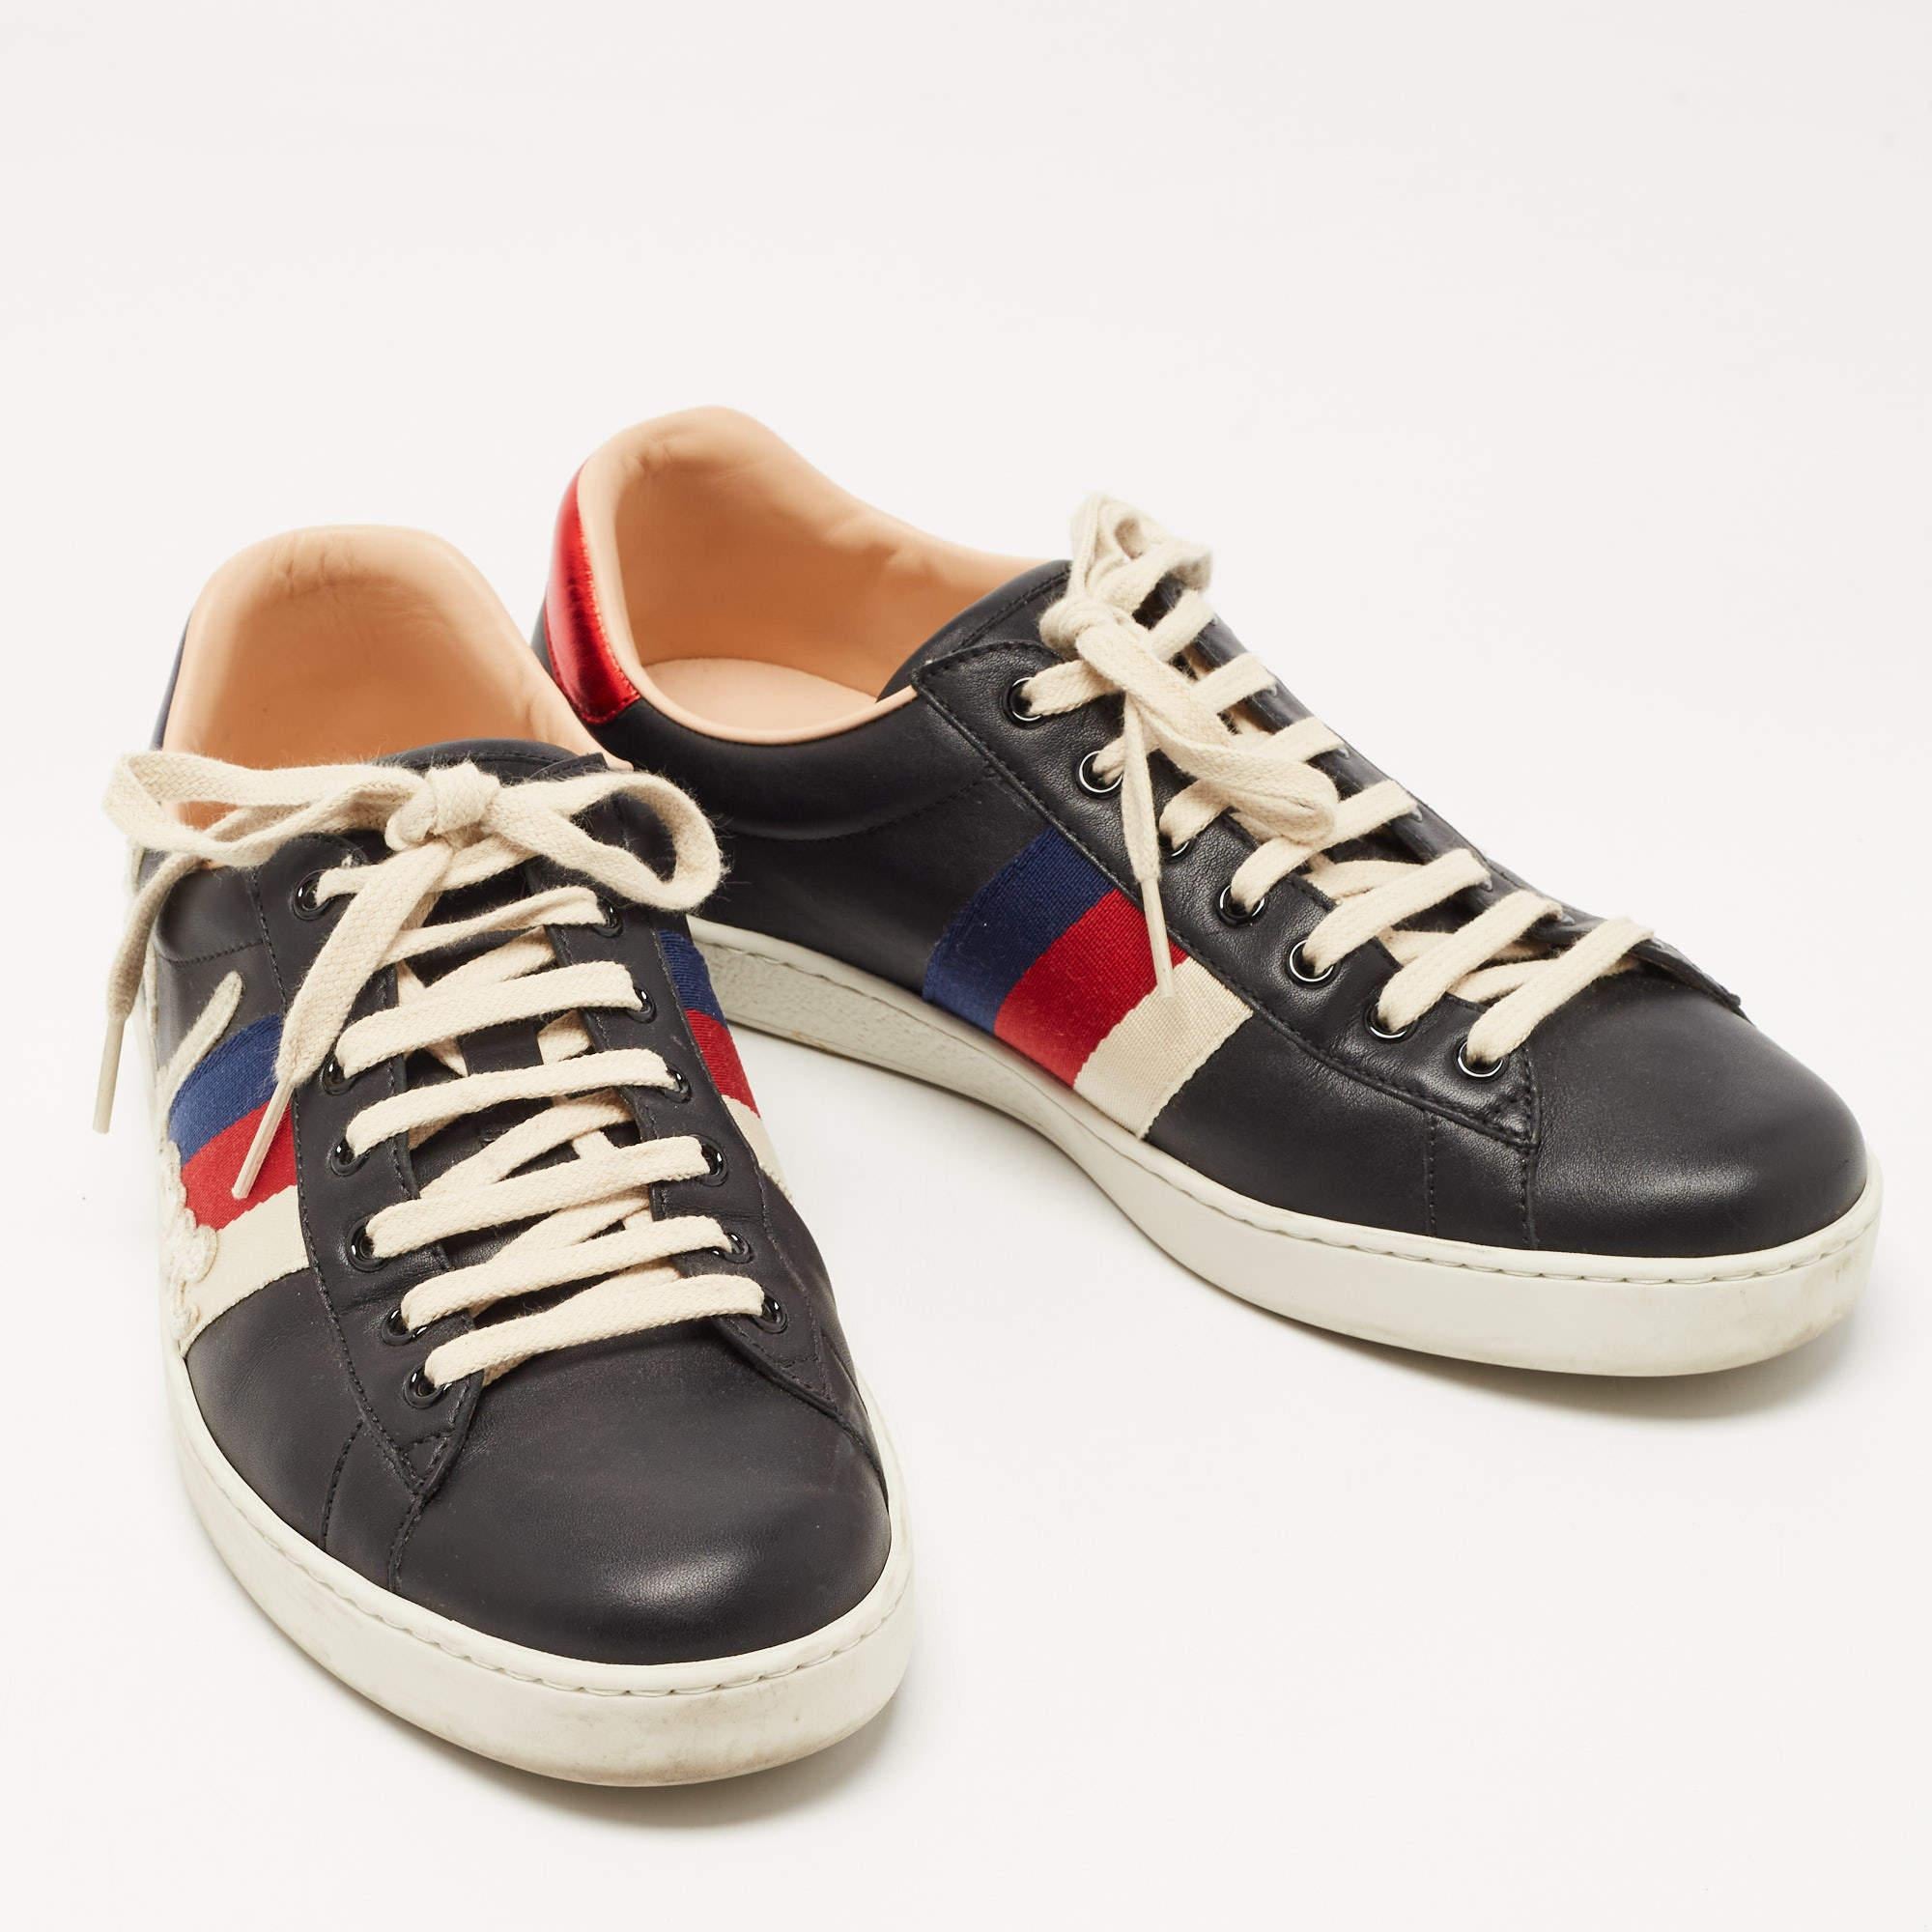 Let this comfortable pair be your first choice when you're out for a long day. These Gucci low-top shoes have well-sewn uppers beautifully set on durable soles.

Includes: Original Dustbag, Original Box, Info Booklet